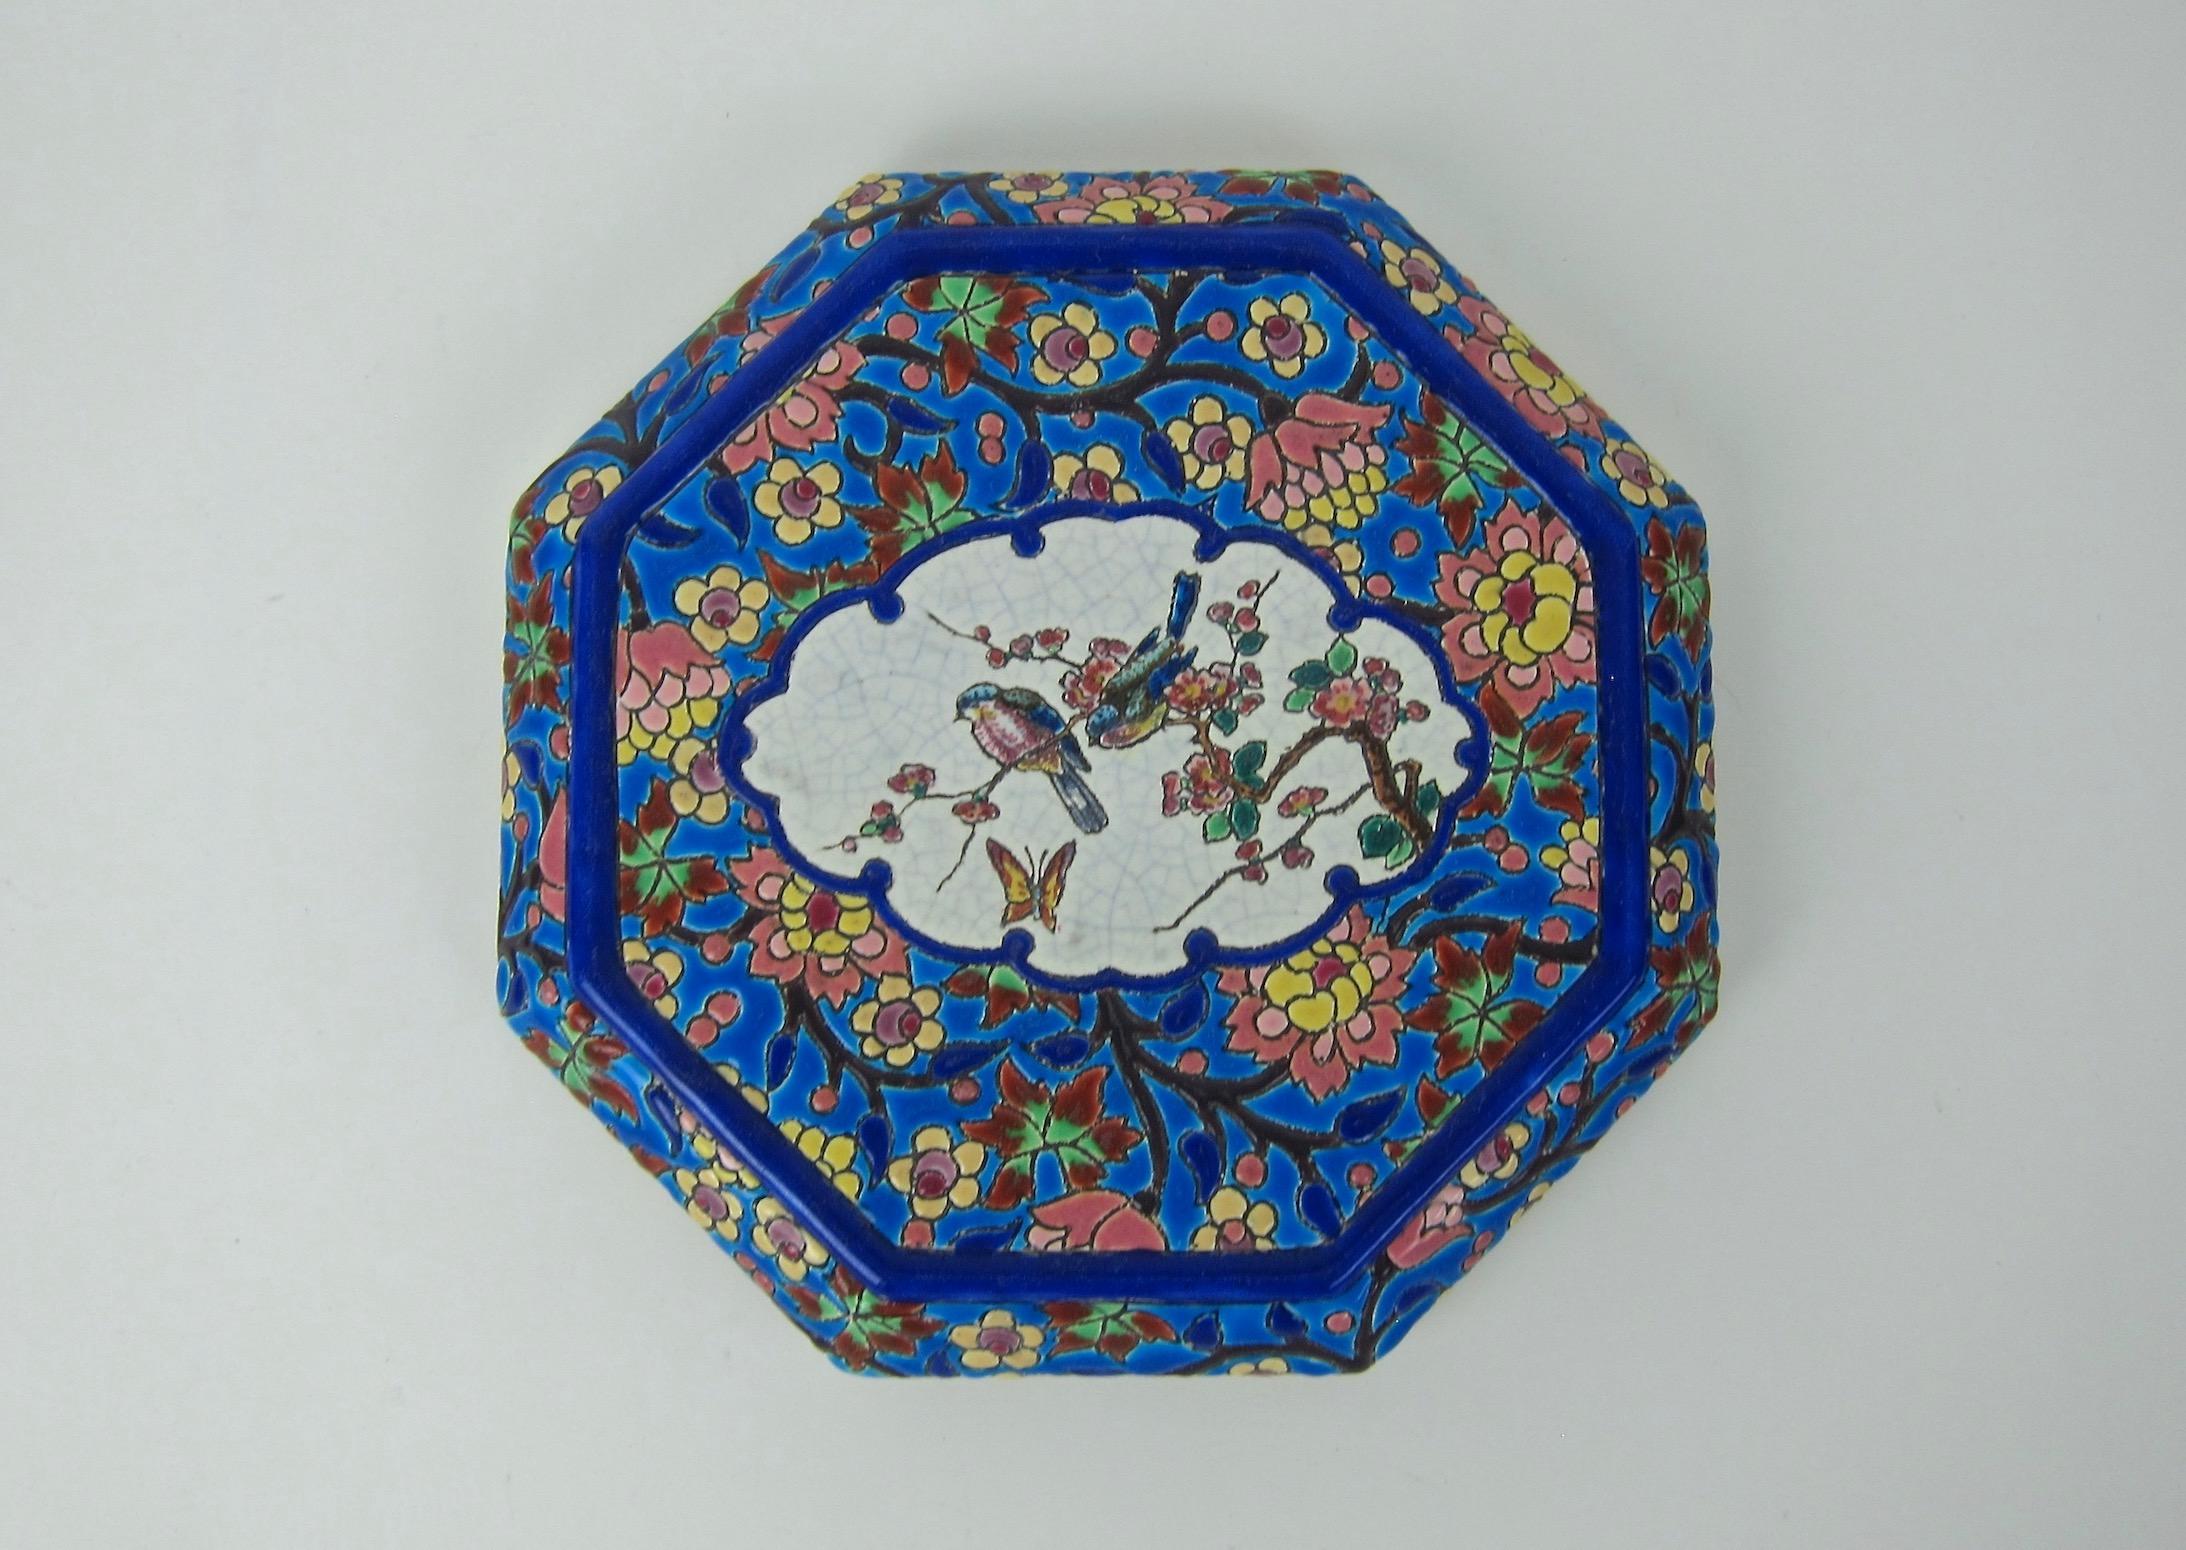 A colorful French faience trivet or stand from the Emaux de Longwy art pottery workshop in France. The vintage ceramic stand rests on four feet and is an octagonal shape designed for display and use on a tabletop. 

The vivid enameled glaze in a